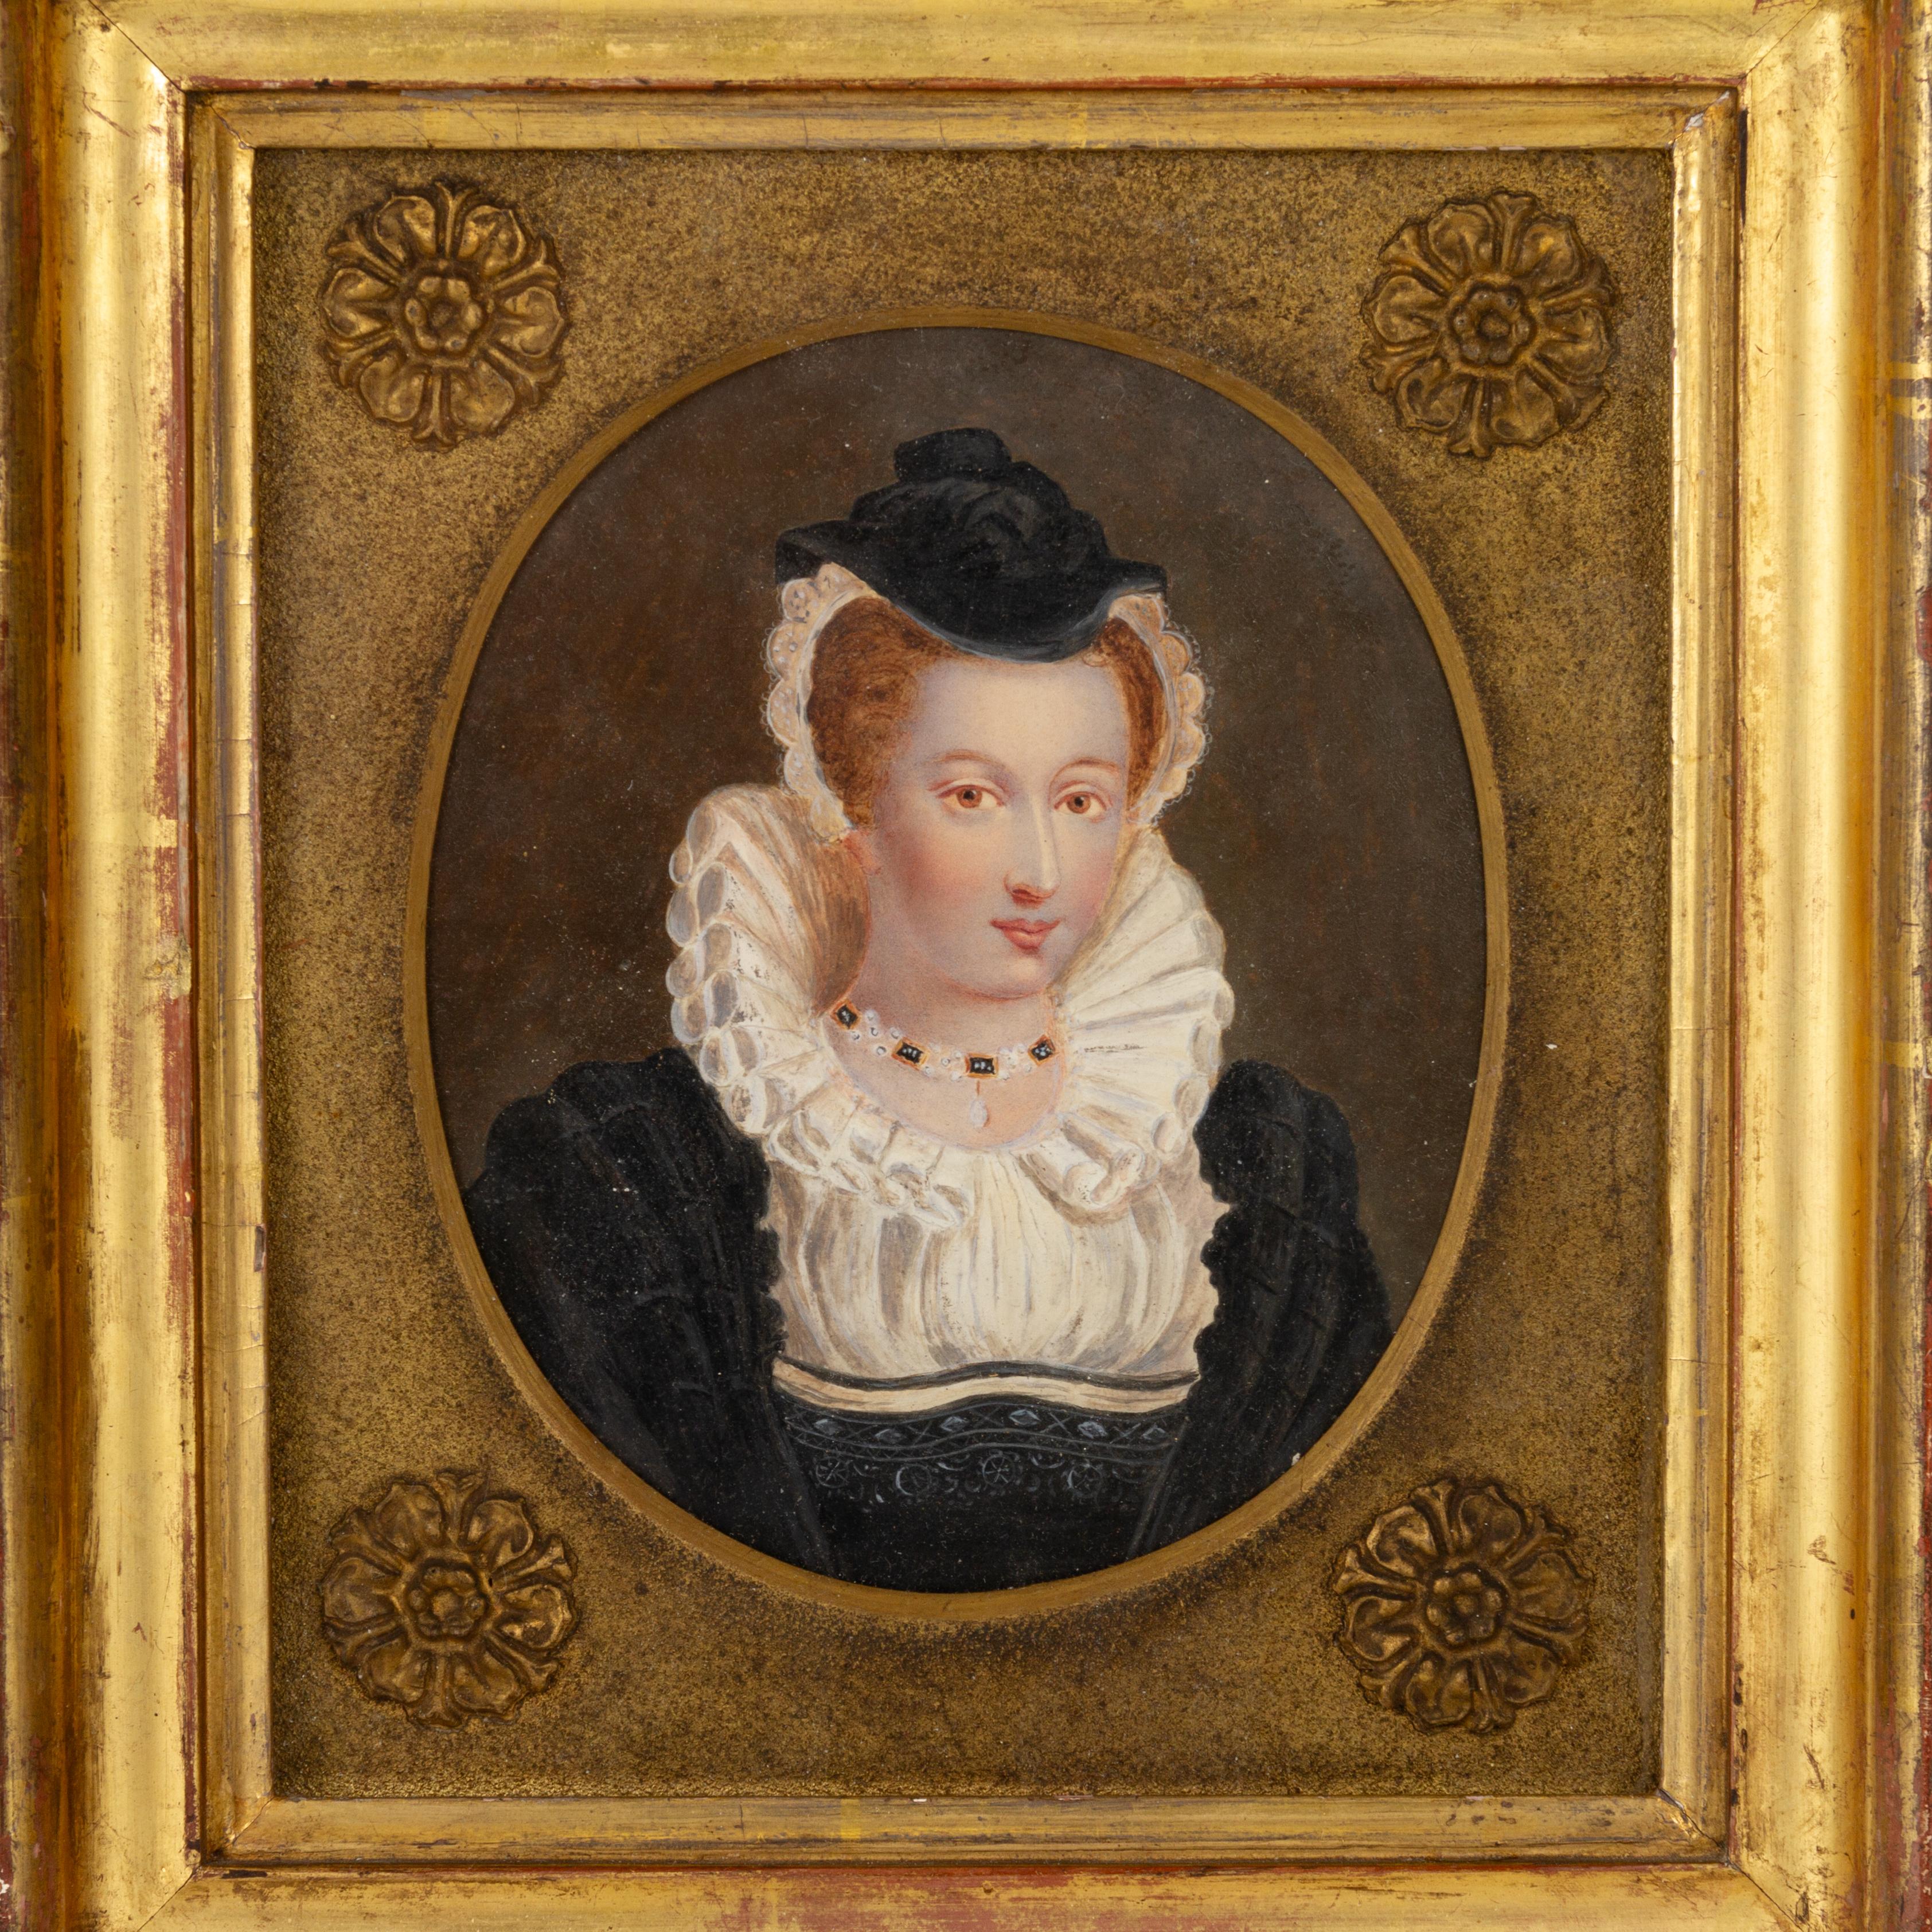 In good condition
From a private collection
Free international shipping
18th Century Old Master Portrait of Mary Queen of Scots 
